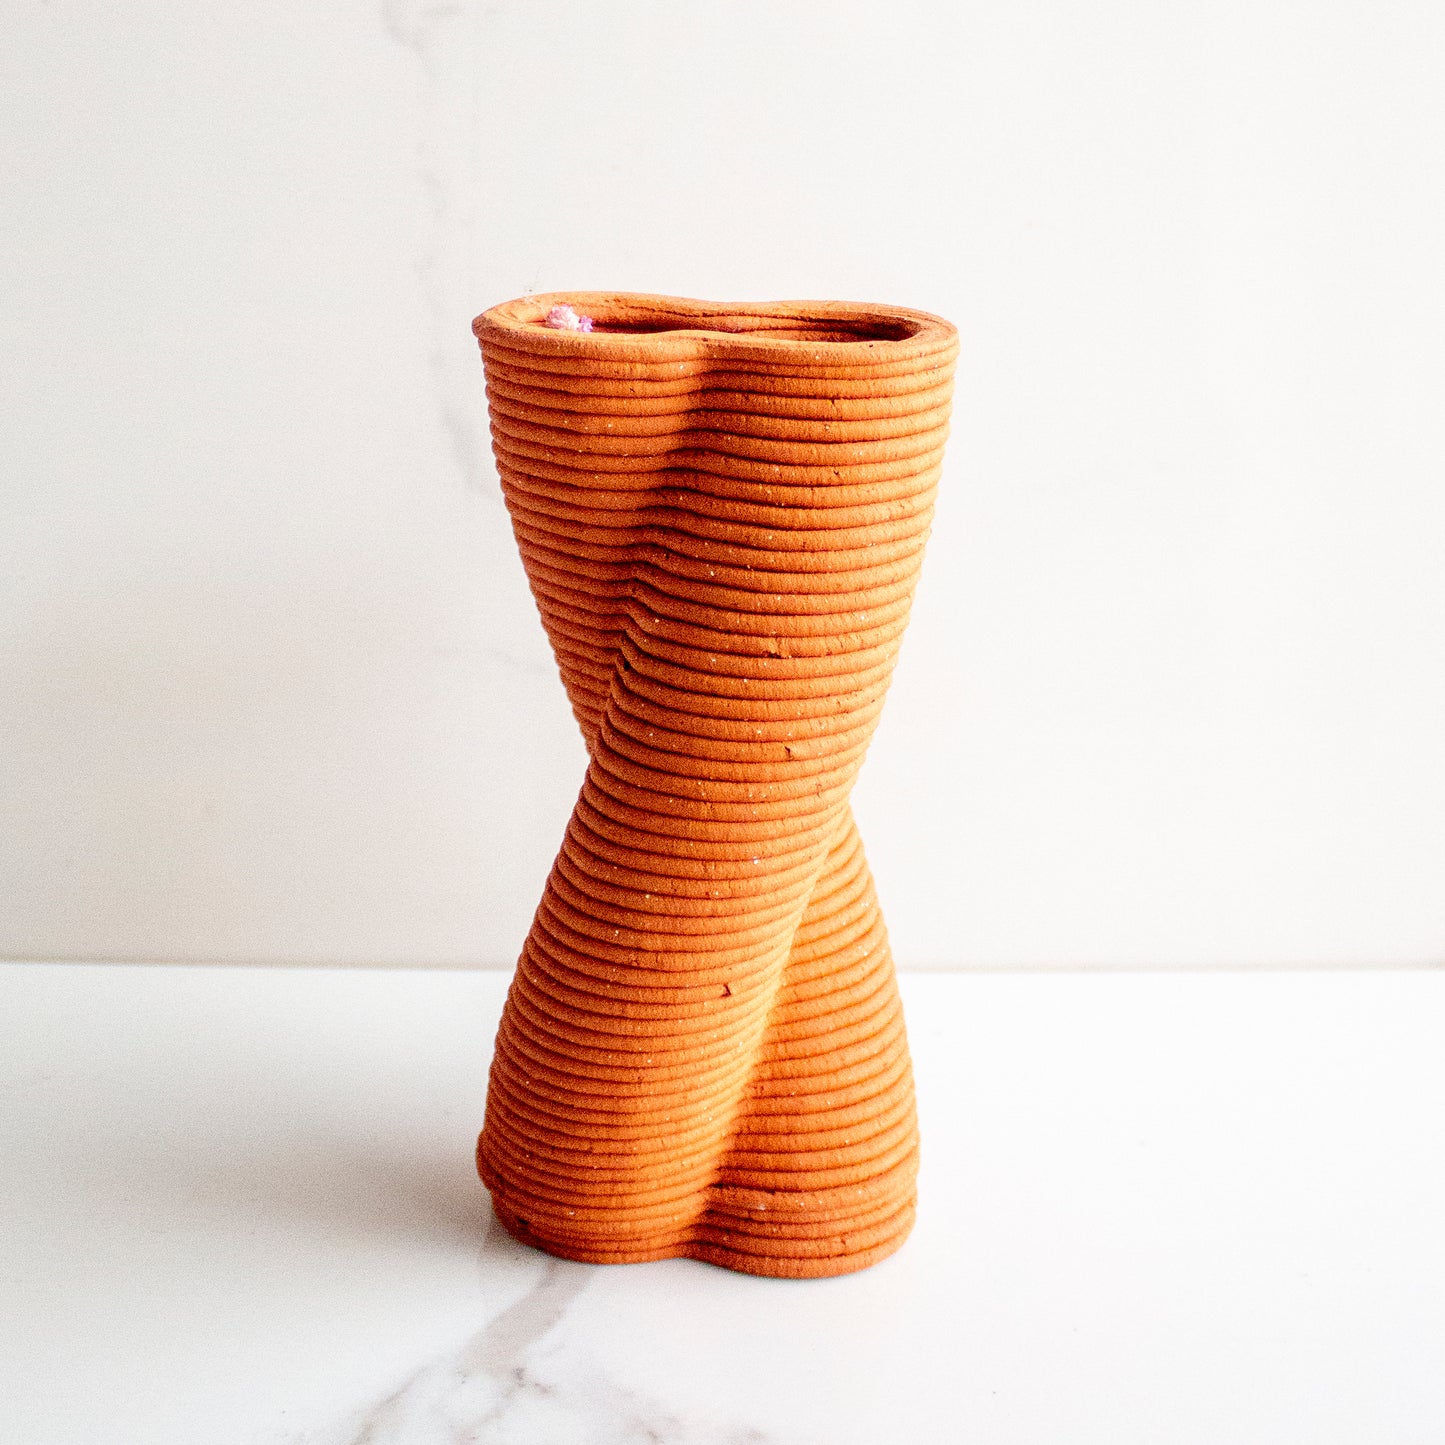 The Brown and Twisted Vol. IV Vase